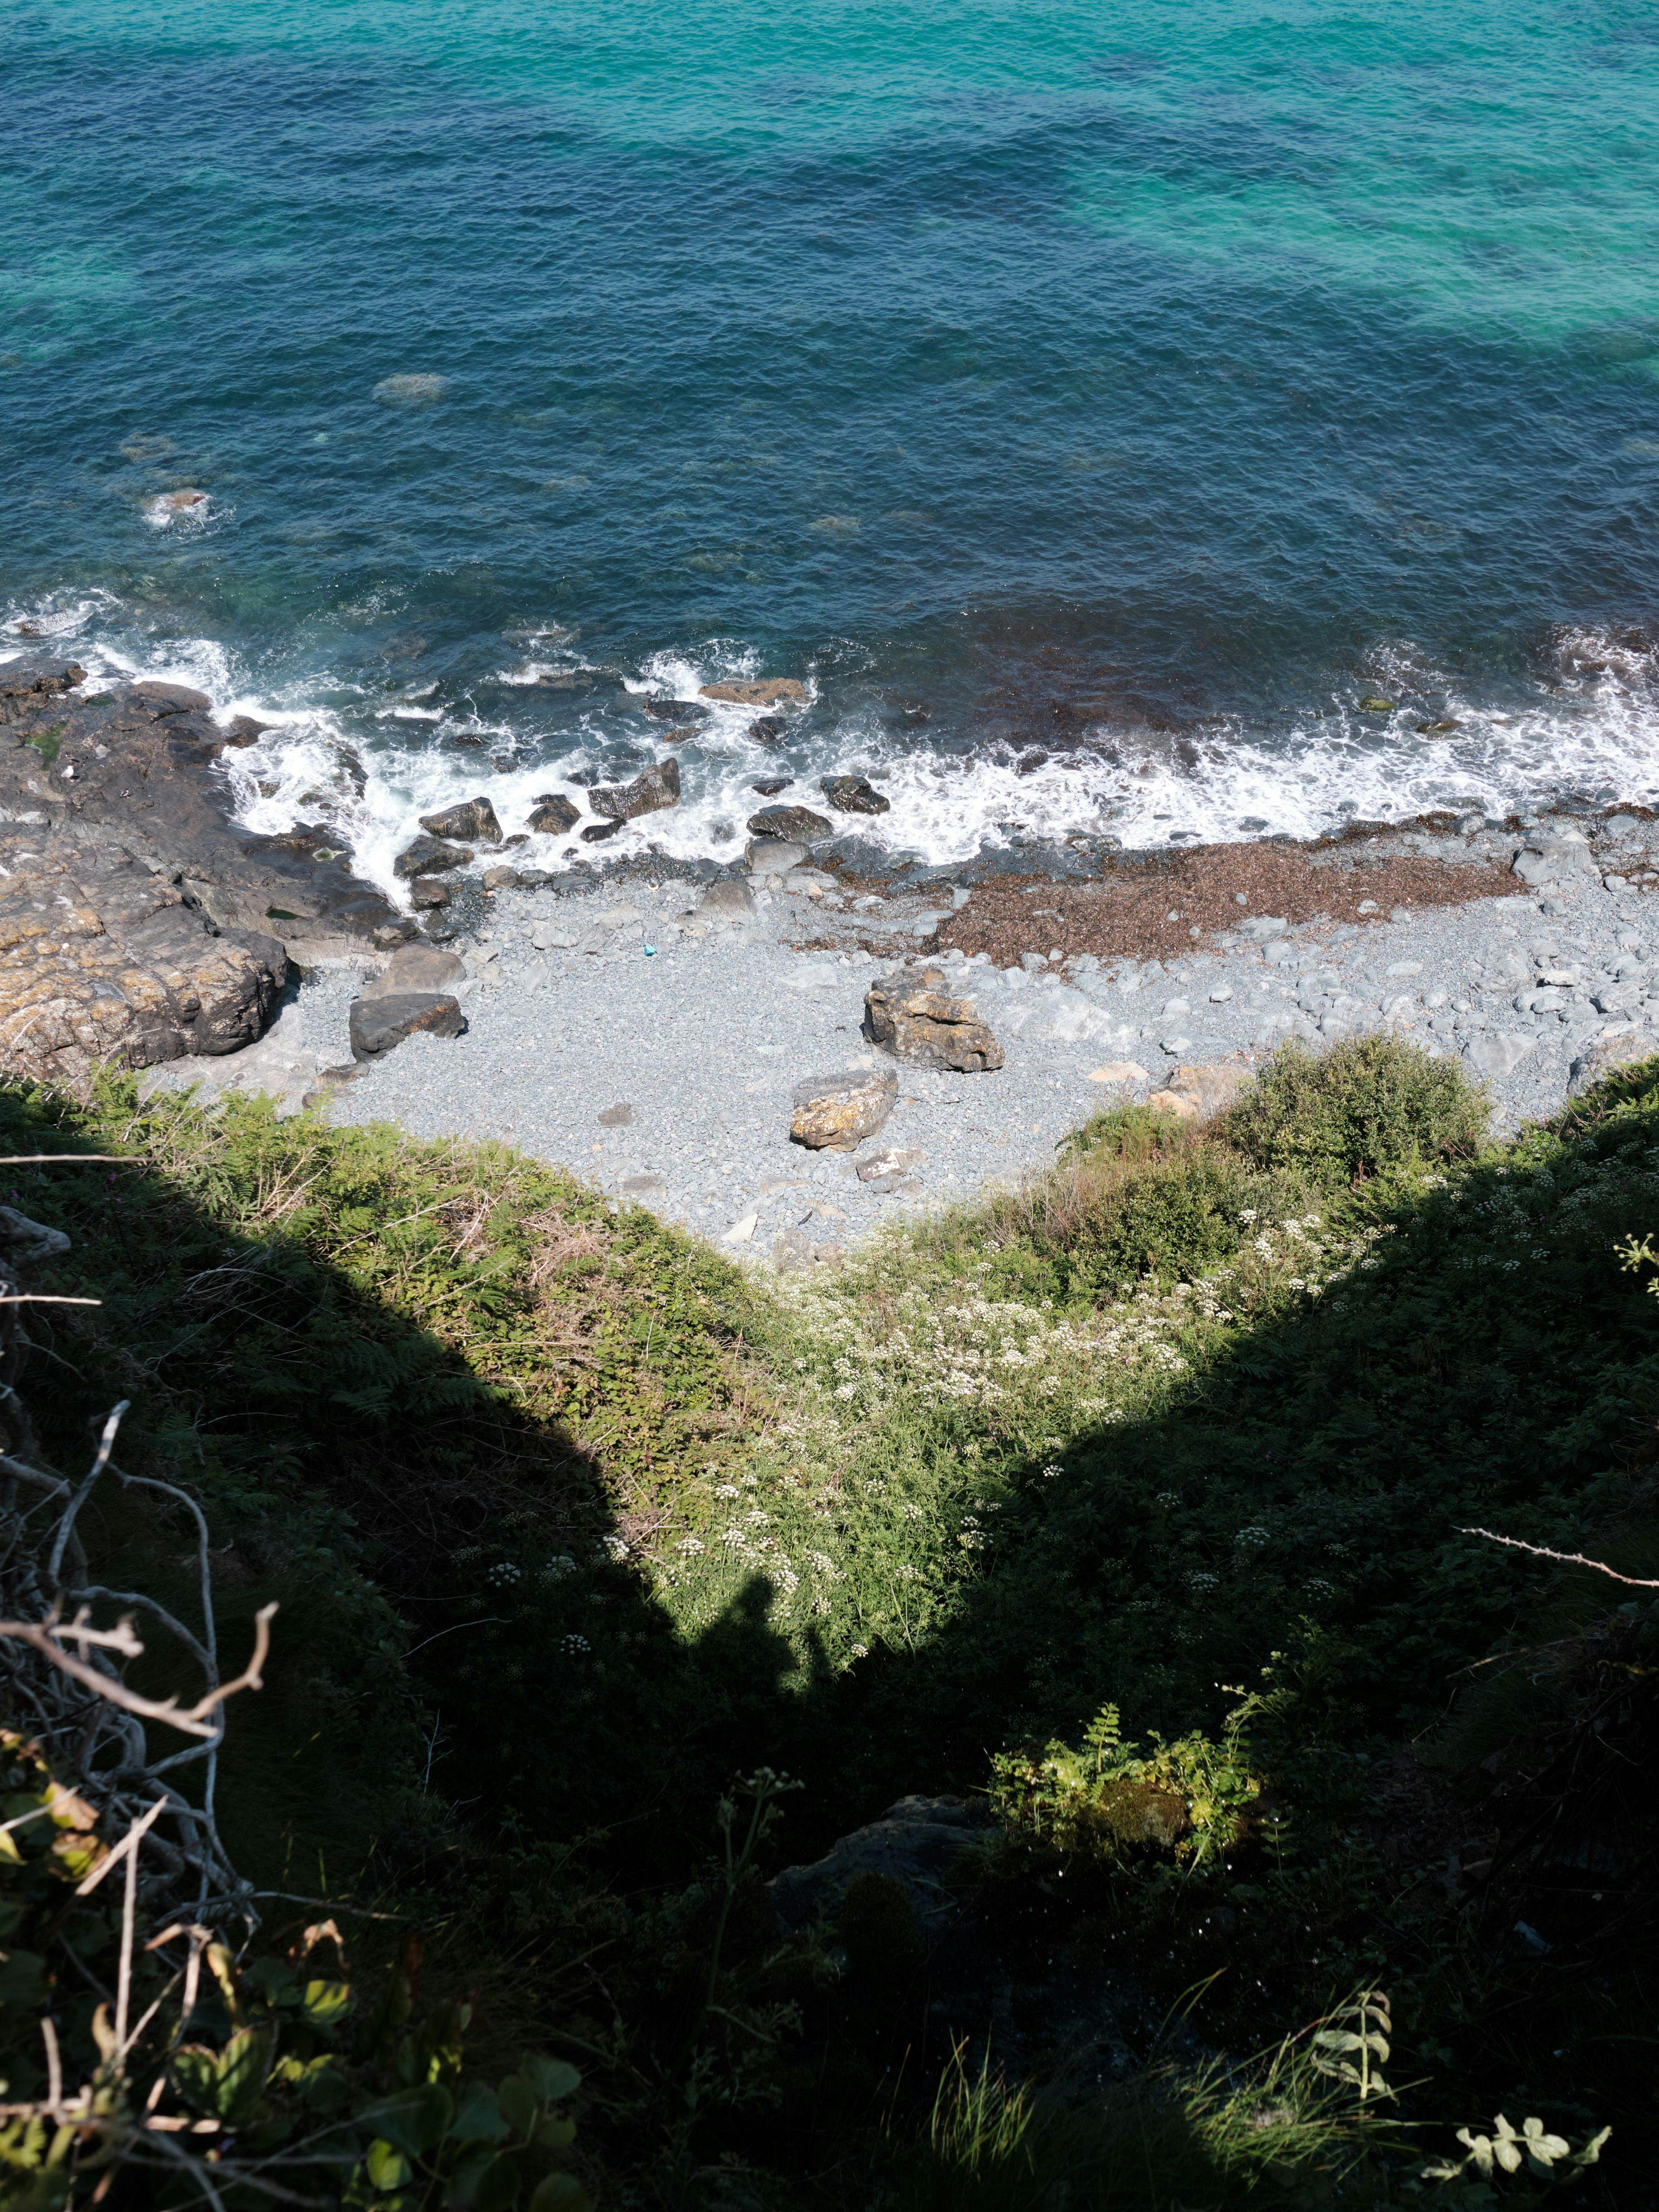 The shadow of the cliff forms a whale tale on the grass and pebbles of the beach below.